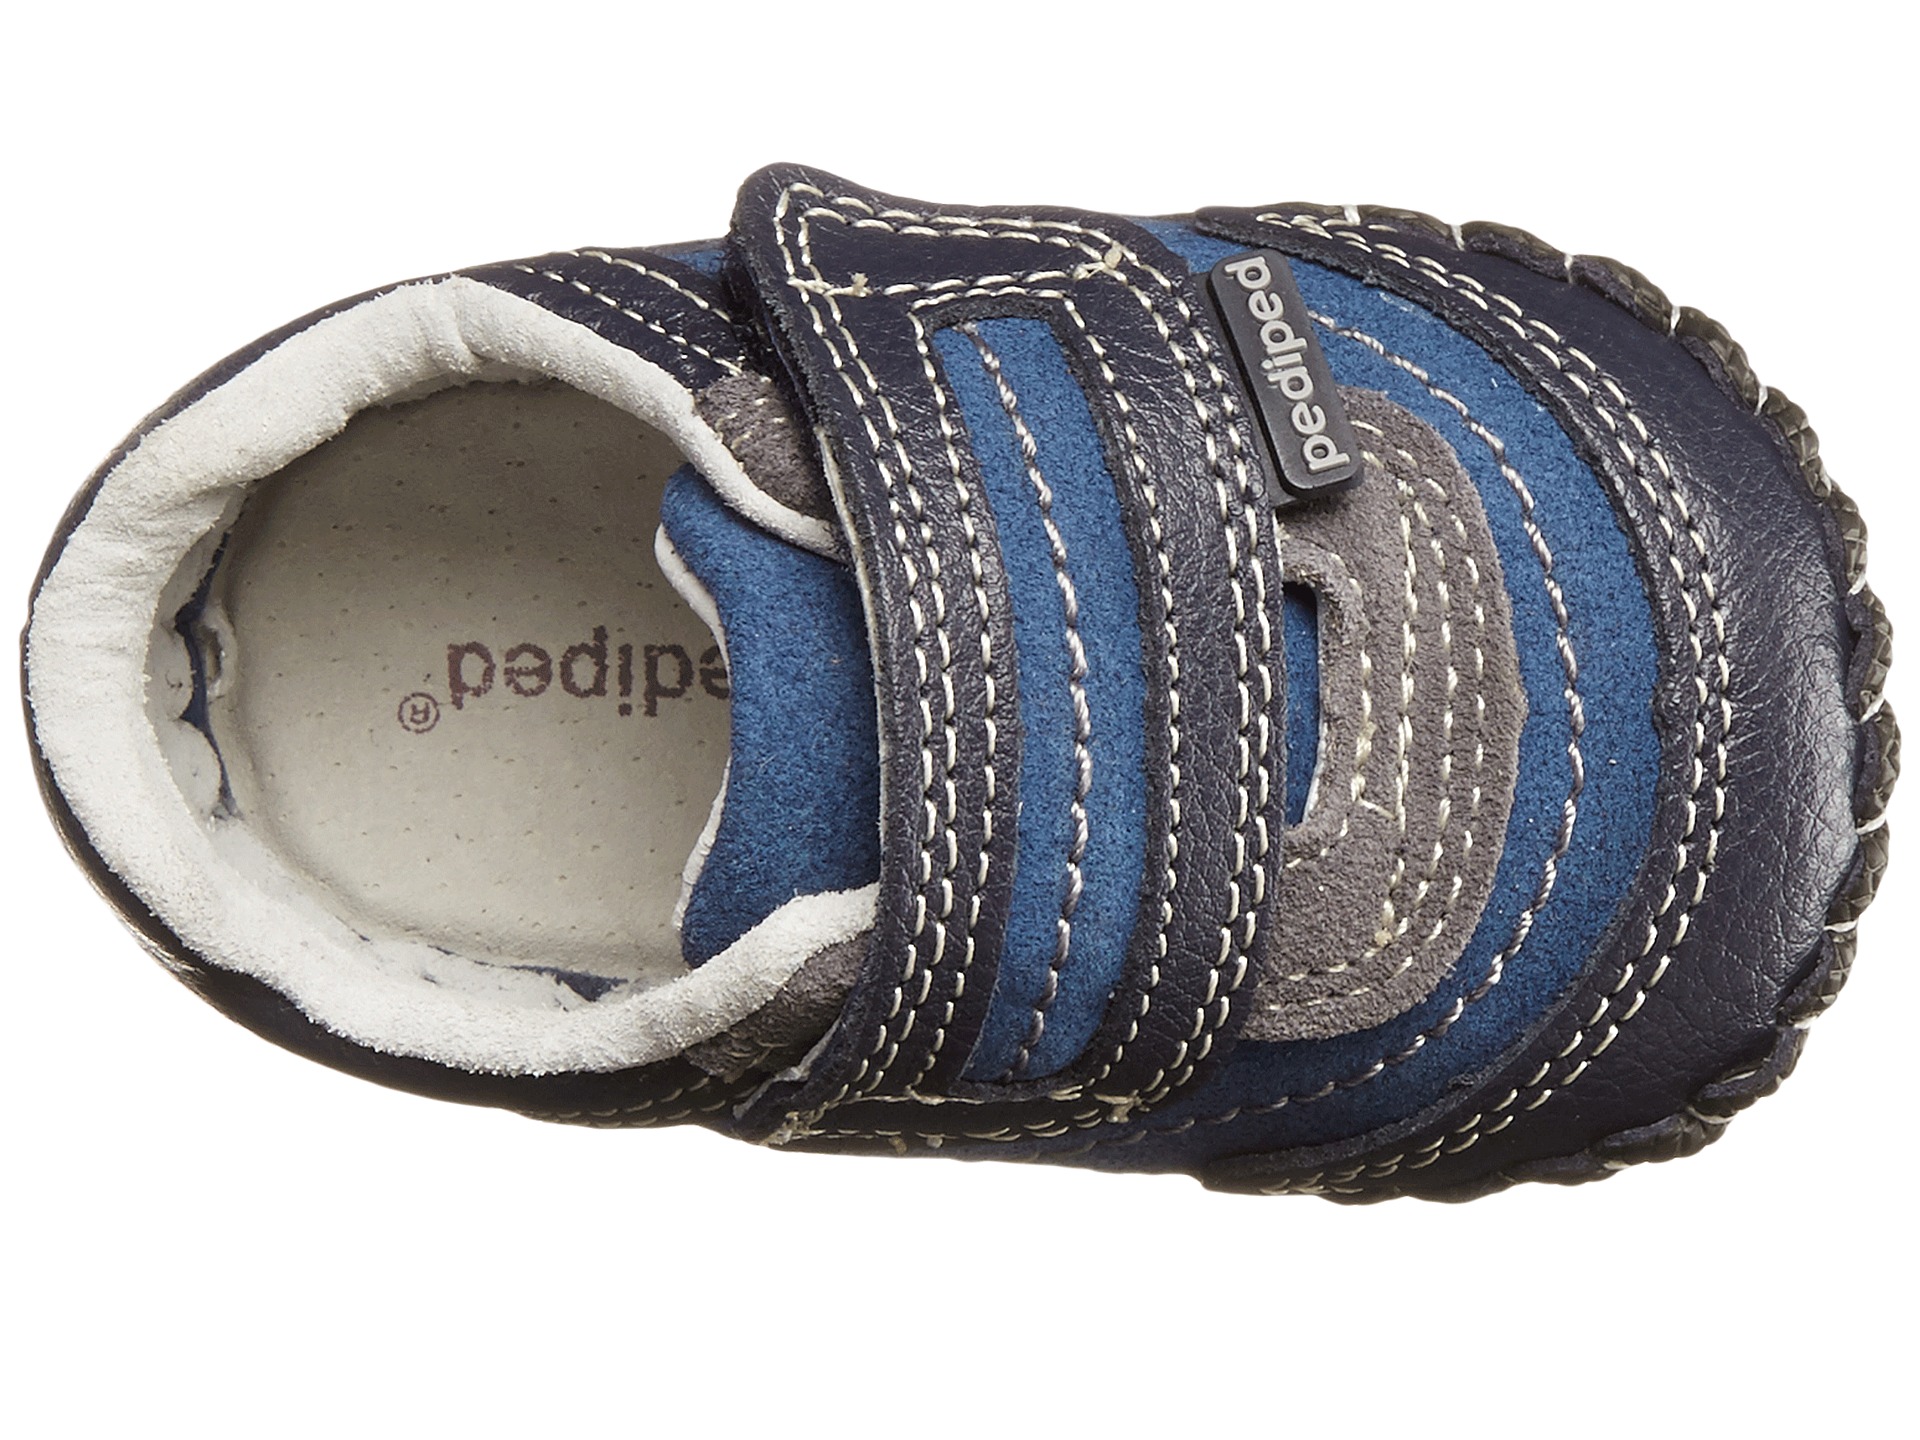 Pediped Teddy Original Infant Navy | Shipped Free at Zappos